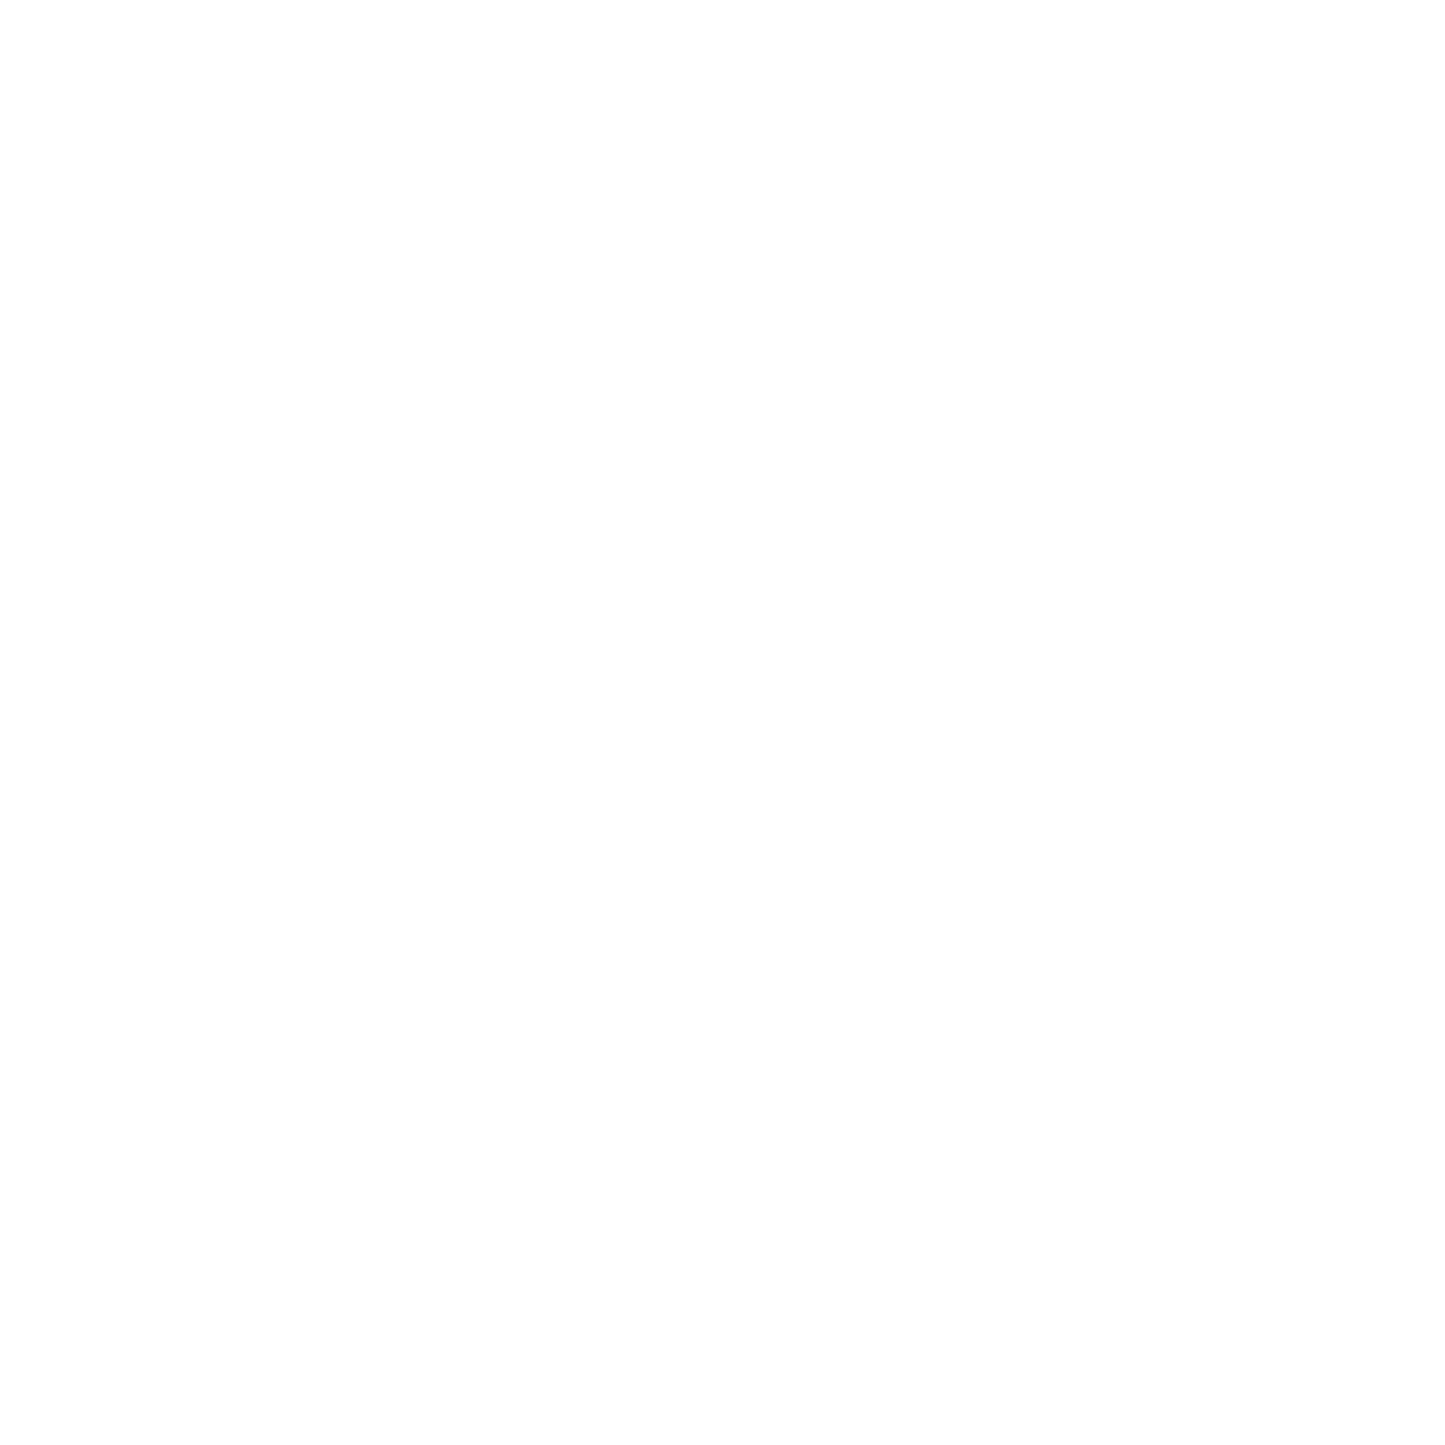 AMERICAN WHITETAIL Decal